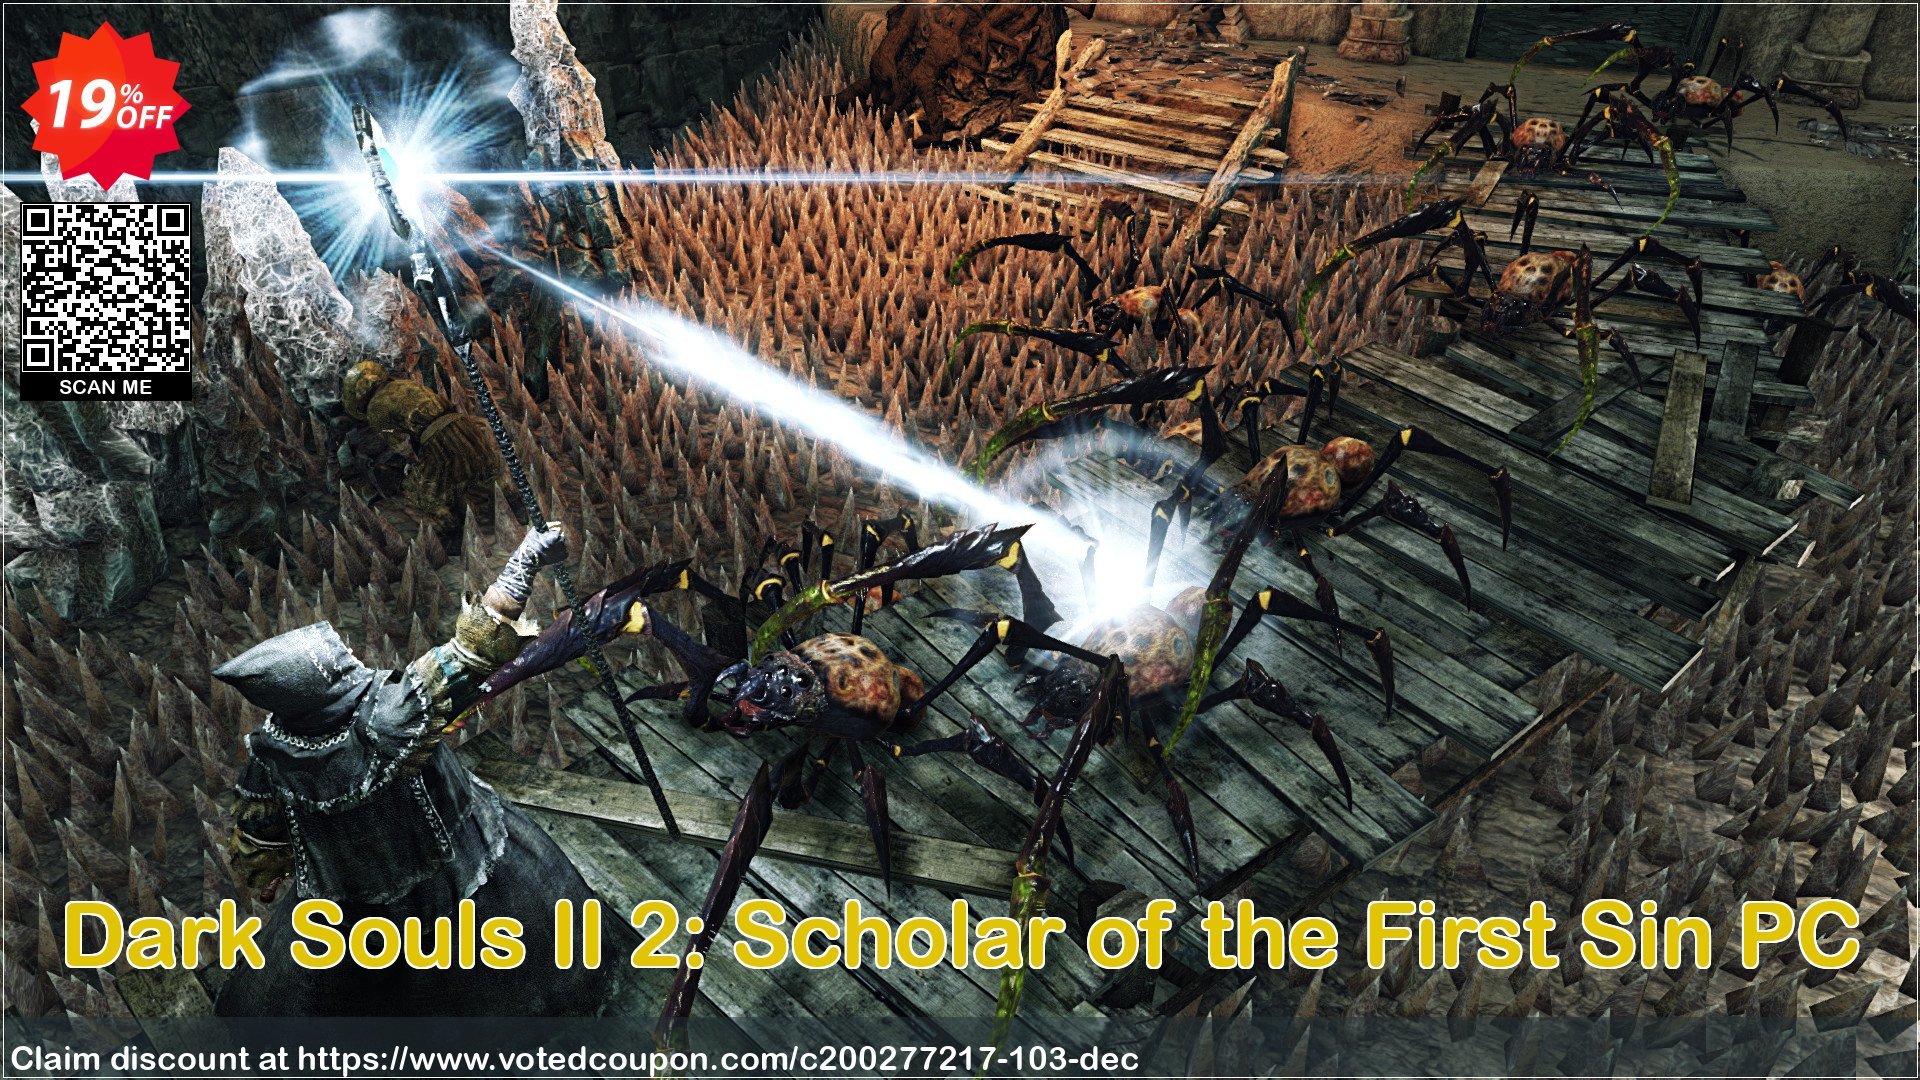 Dark Souls II 2: Scholar of the First Sin PC Coupon Code Apr 2024, 19% OFF - VotedCoupon